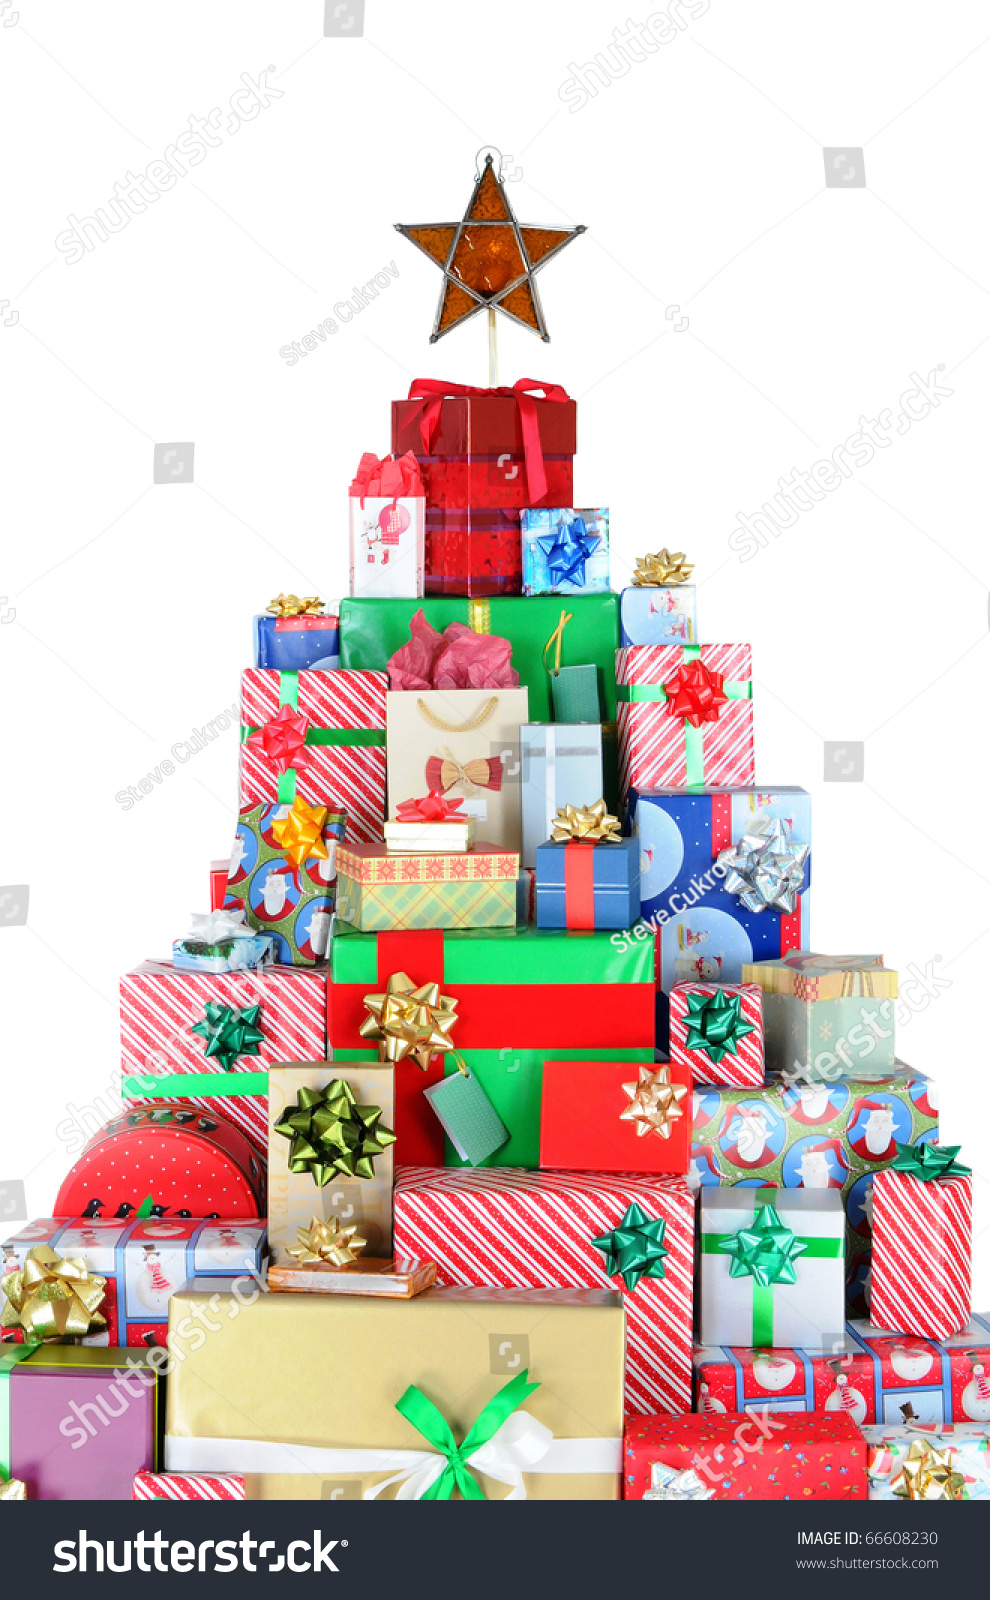 Wrapped Presents Stacked In The Form Of A Christmas Tree With A Star At ...